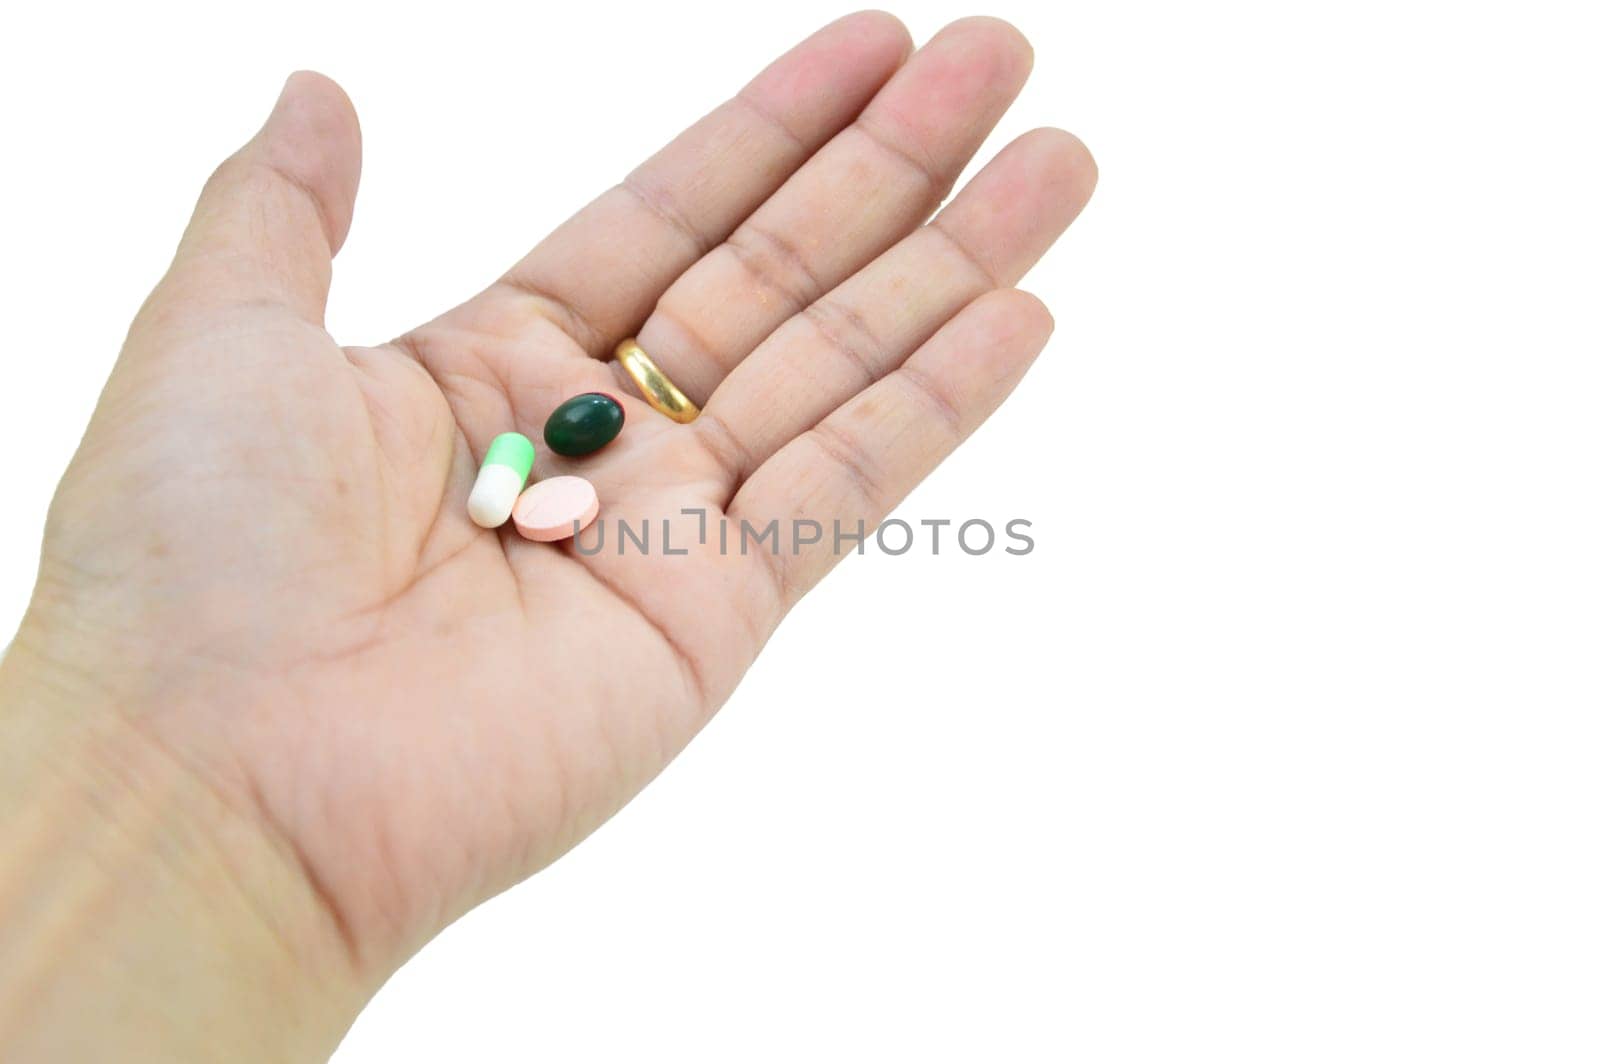 A hand with a pill on it, with clipping path by boonruen